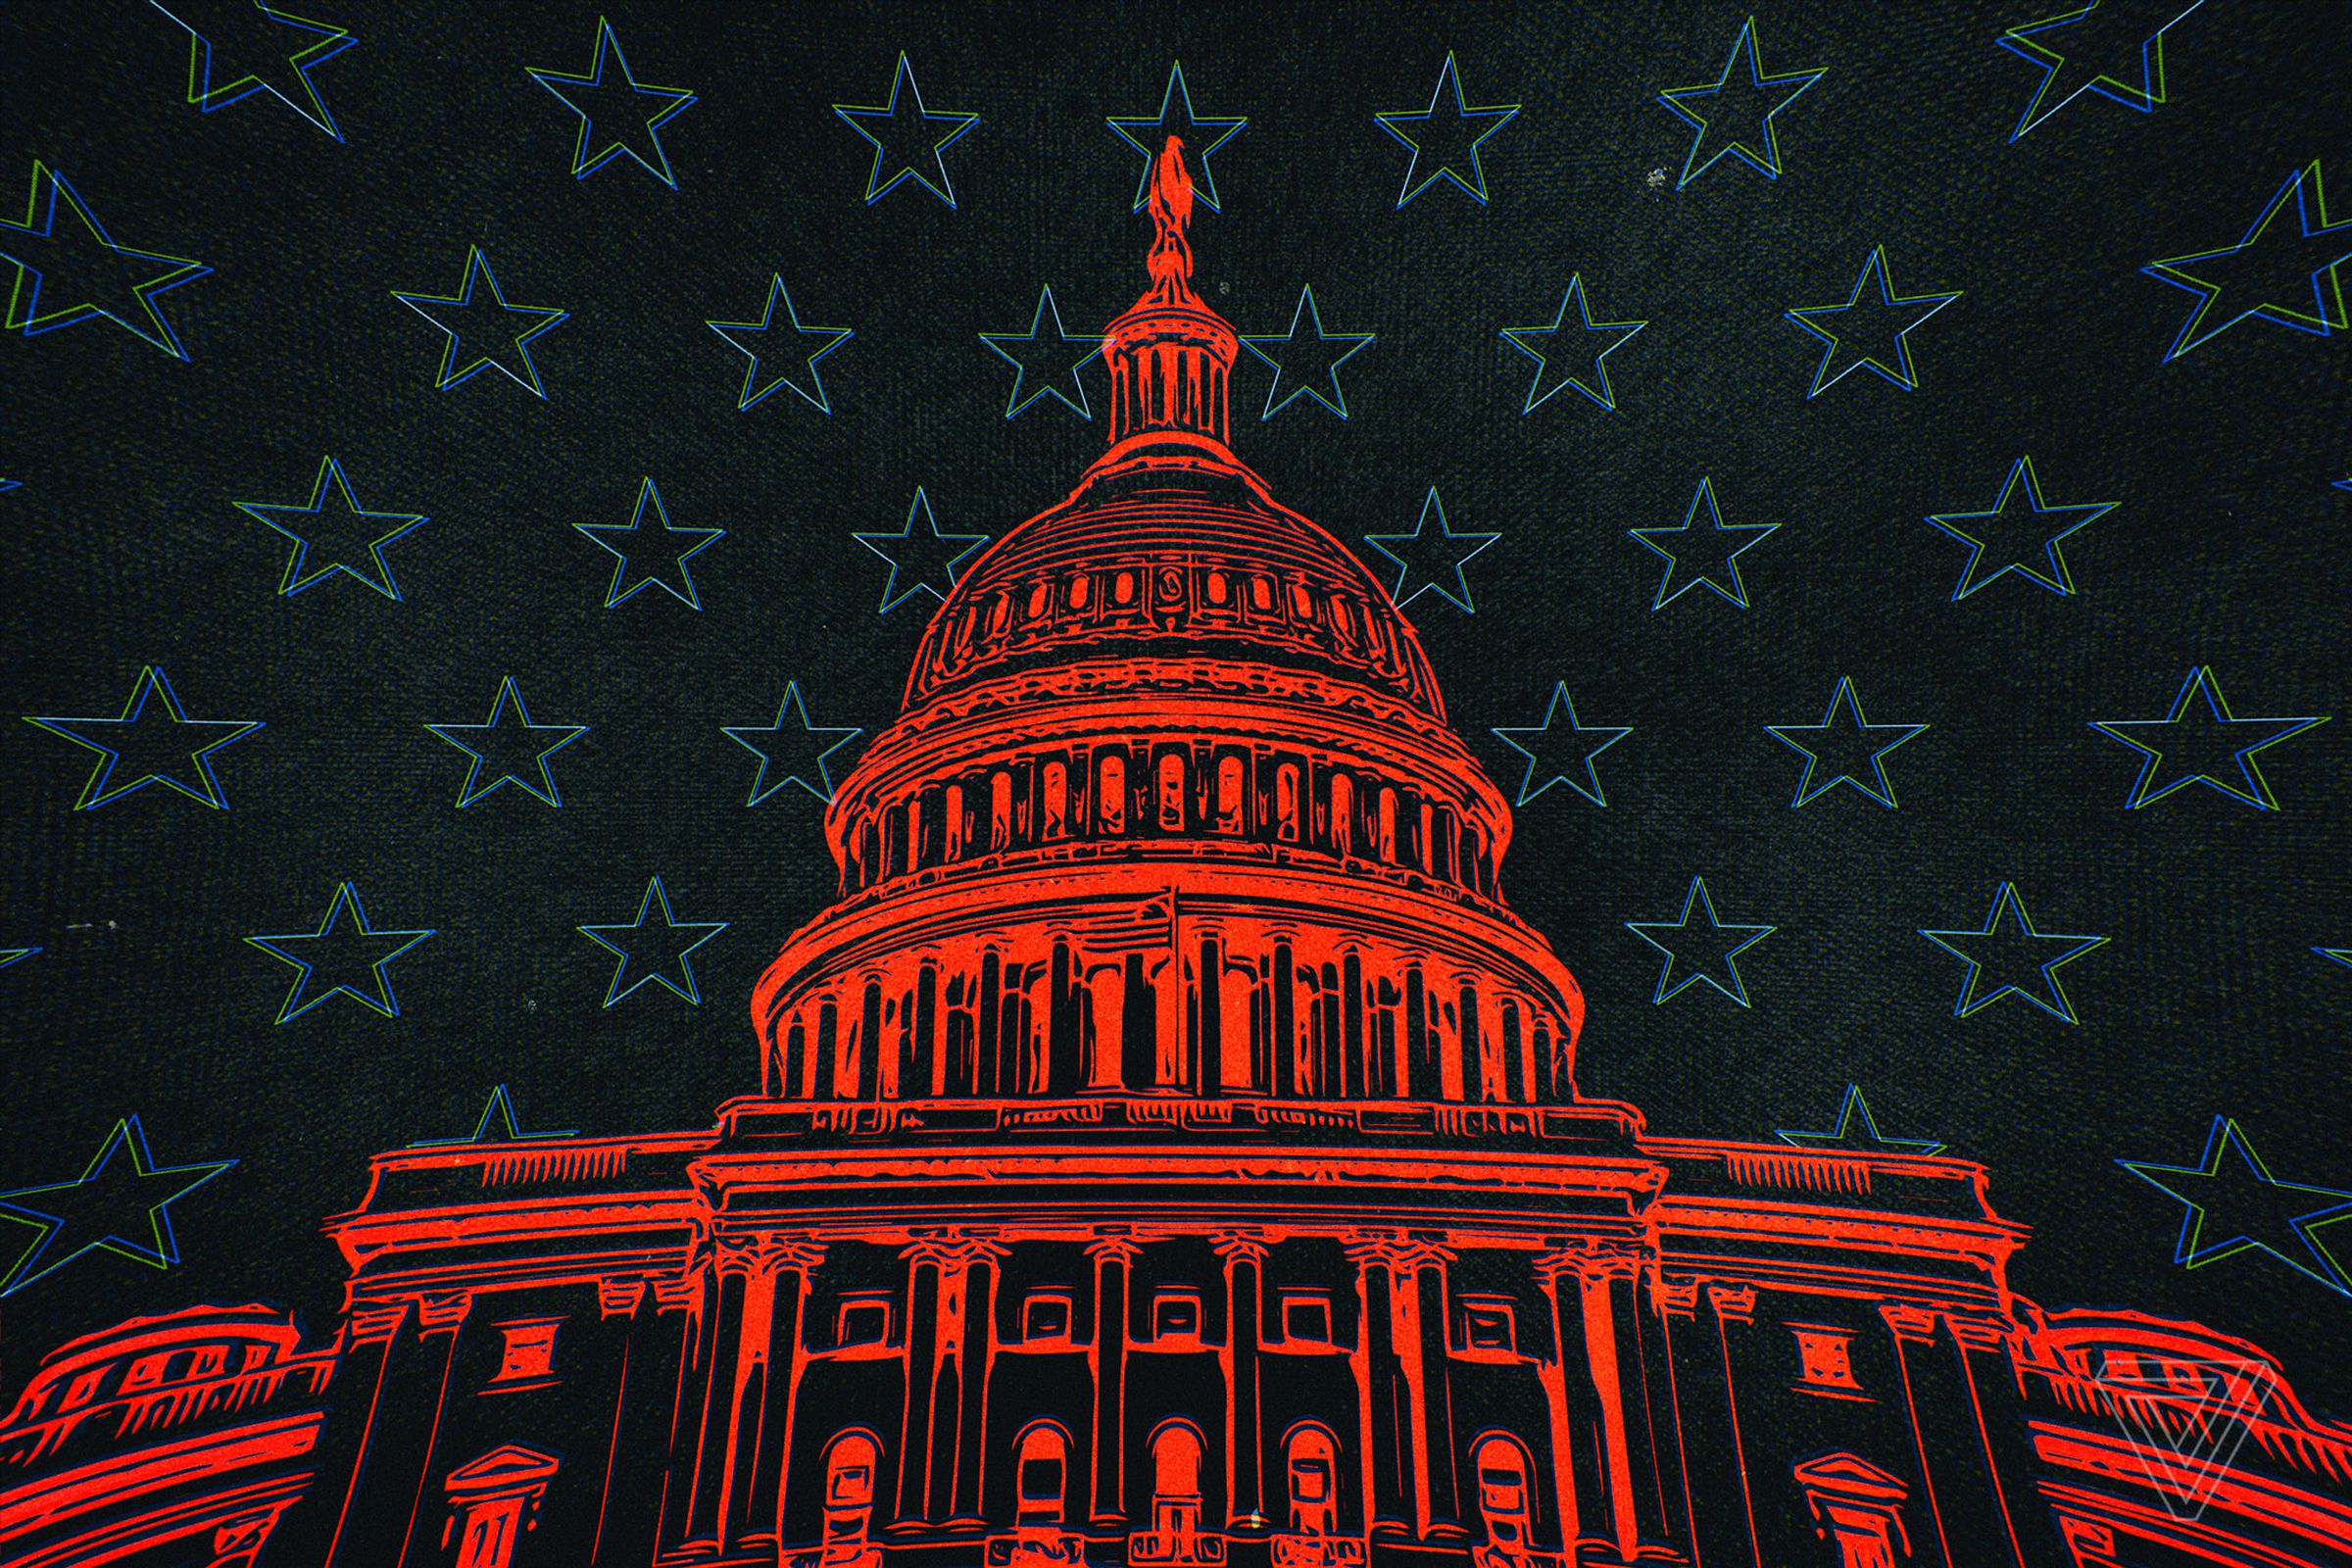 The image is an illustration of the US Capitol building overlaid on a star patterned background.